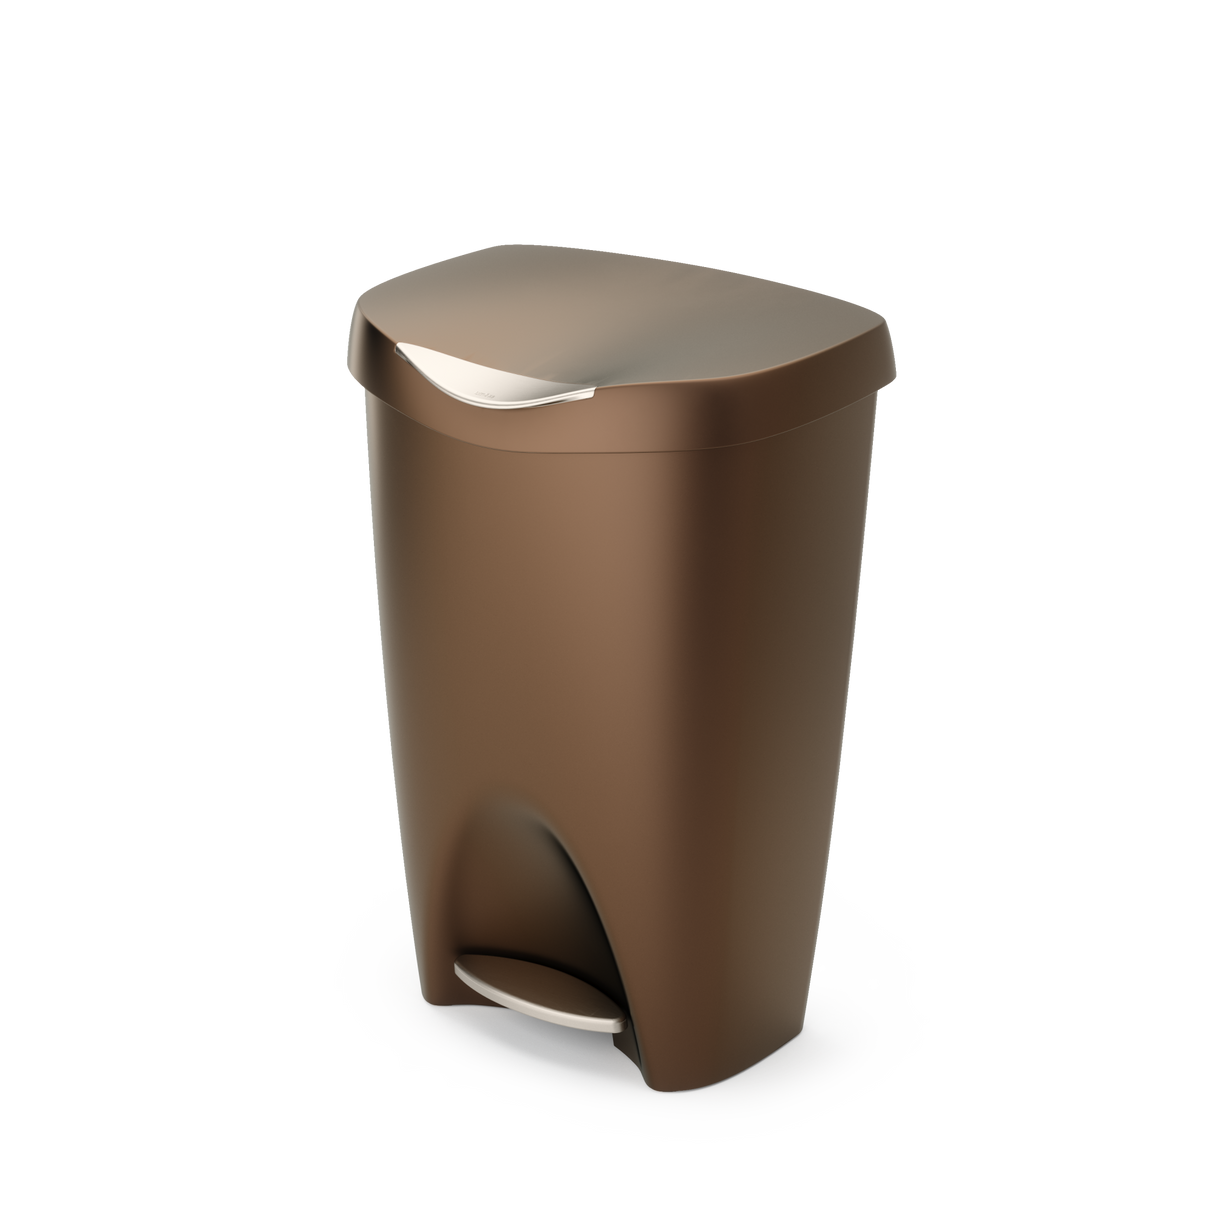 Kitchen Trash Can 13 Gallon Trash Can with Lid-Garbage Can Kitchen, Brown